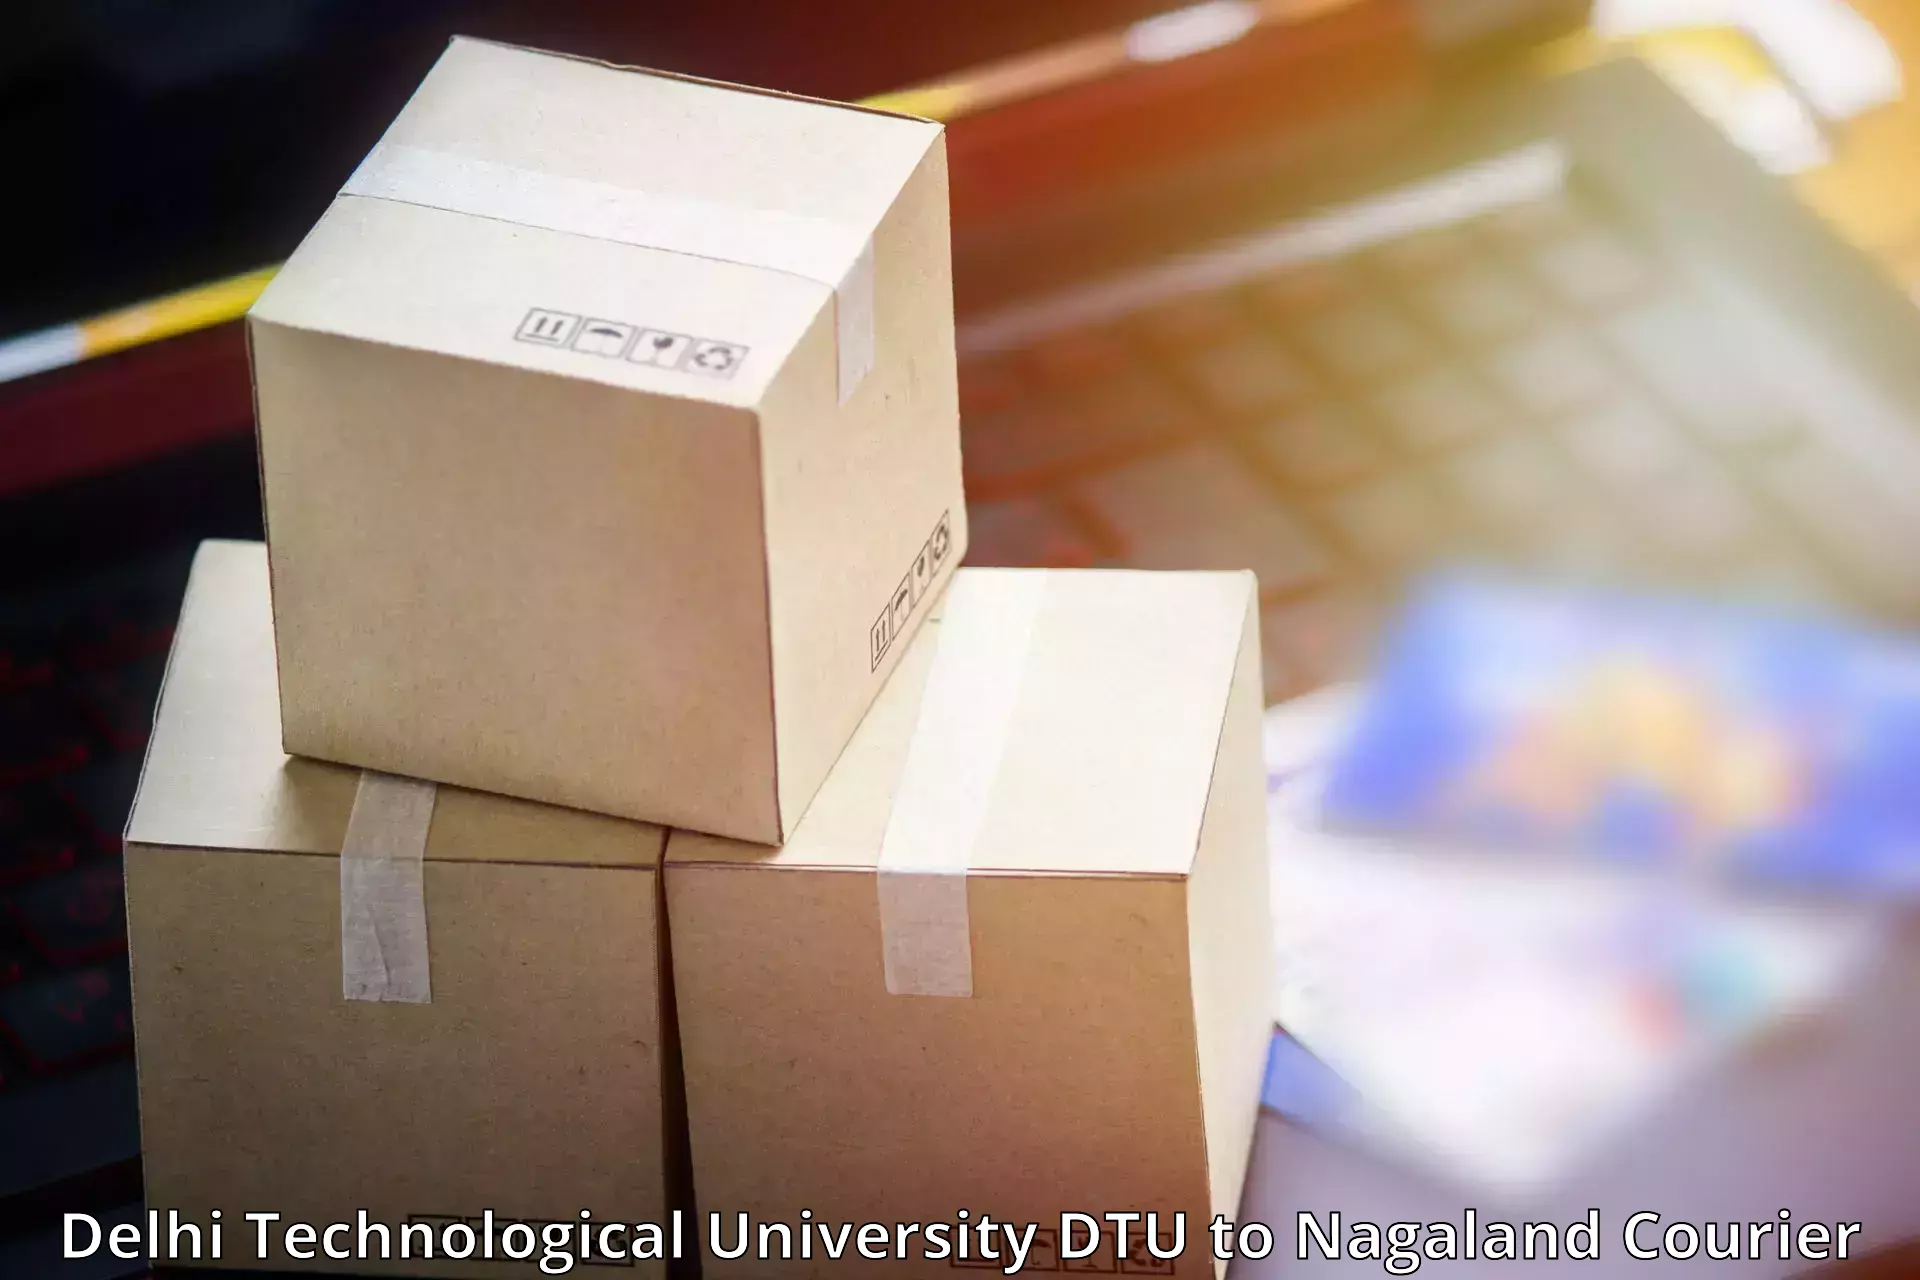 On-call courier service Delhi Technological University DTU to Chumukedima